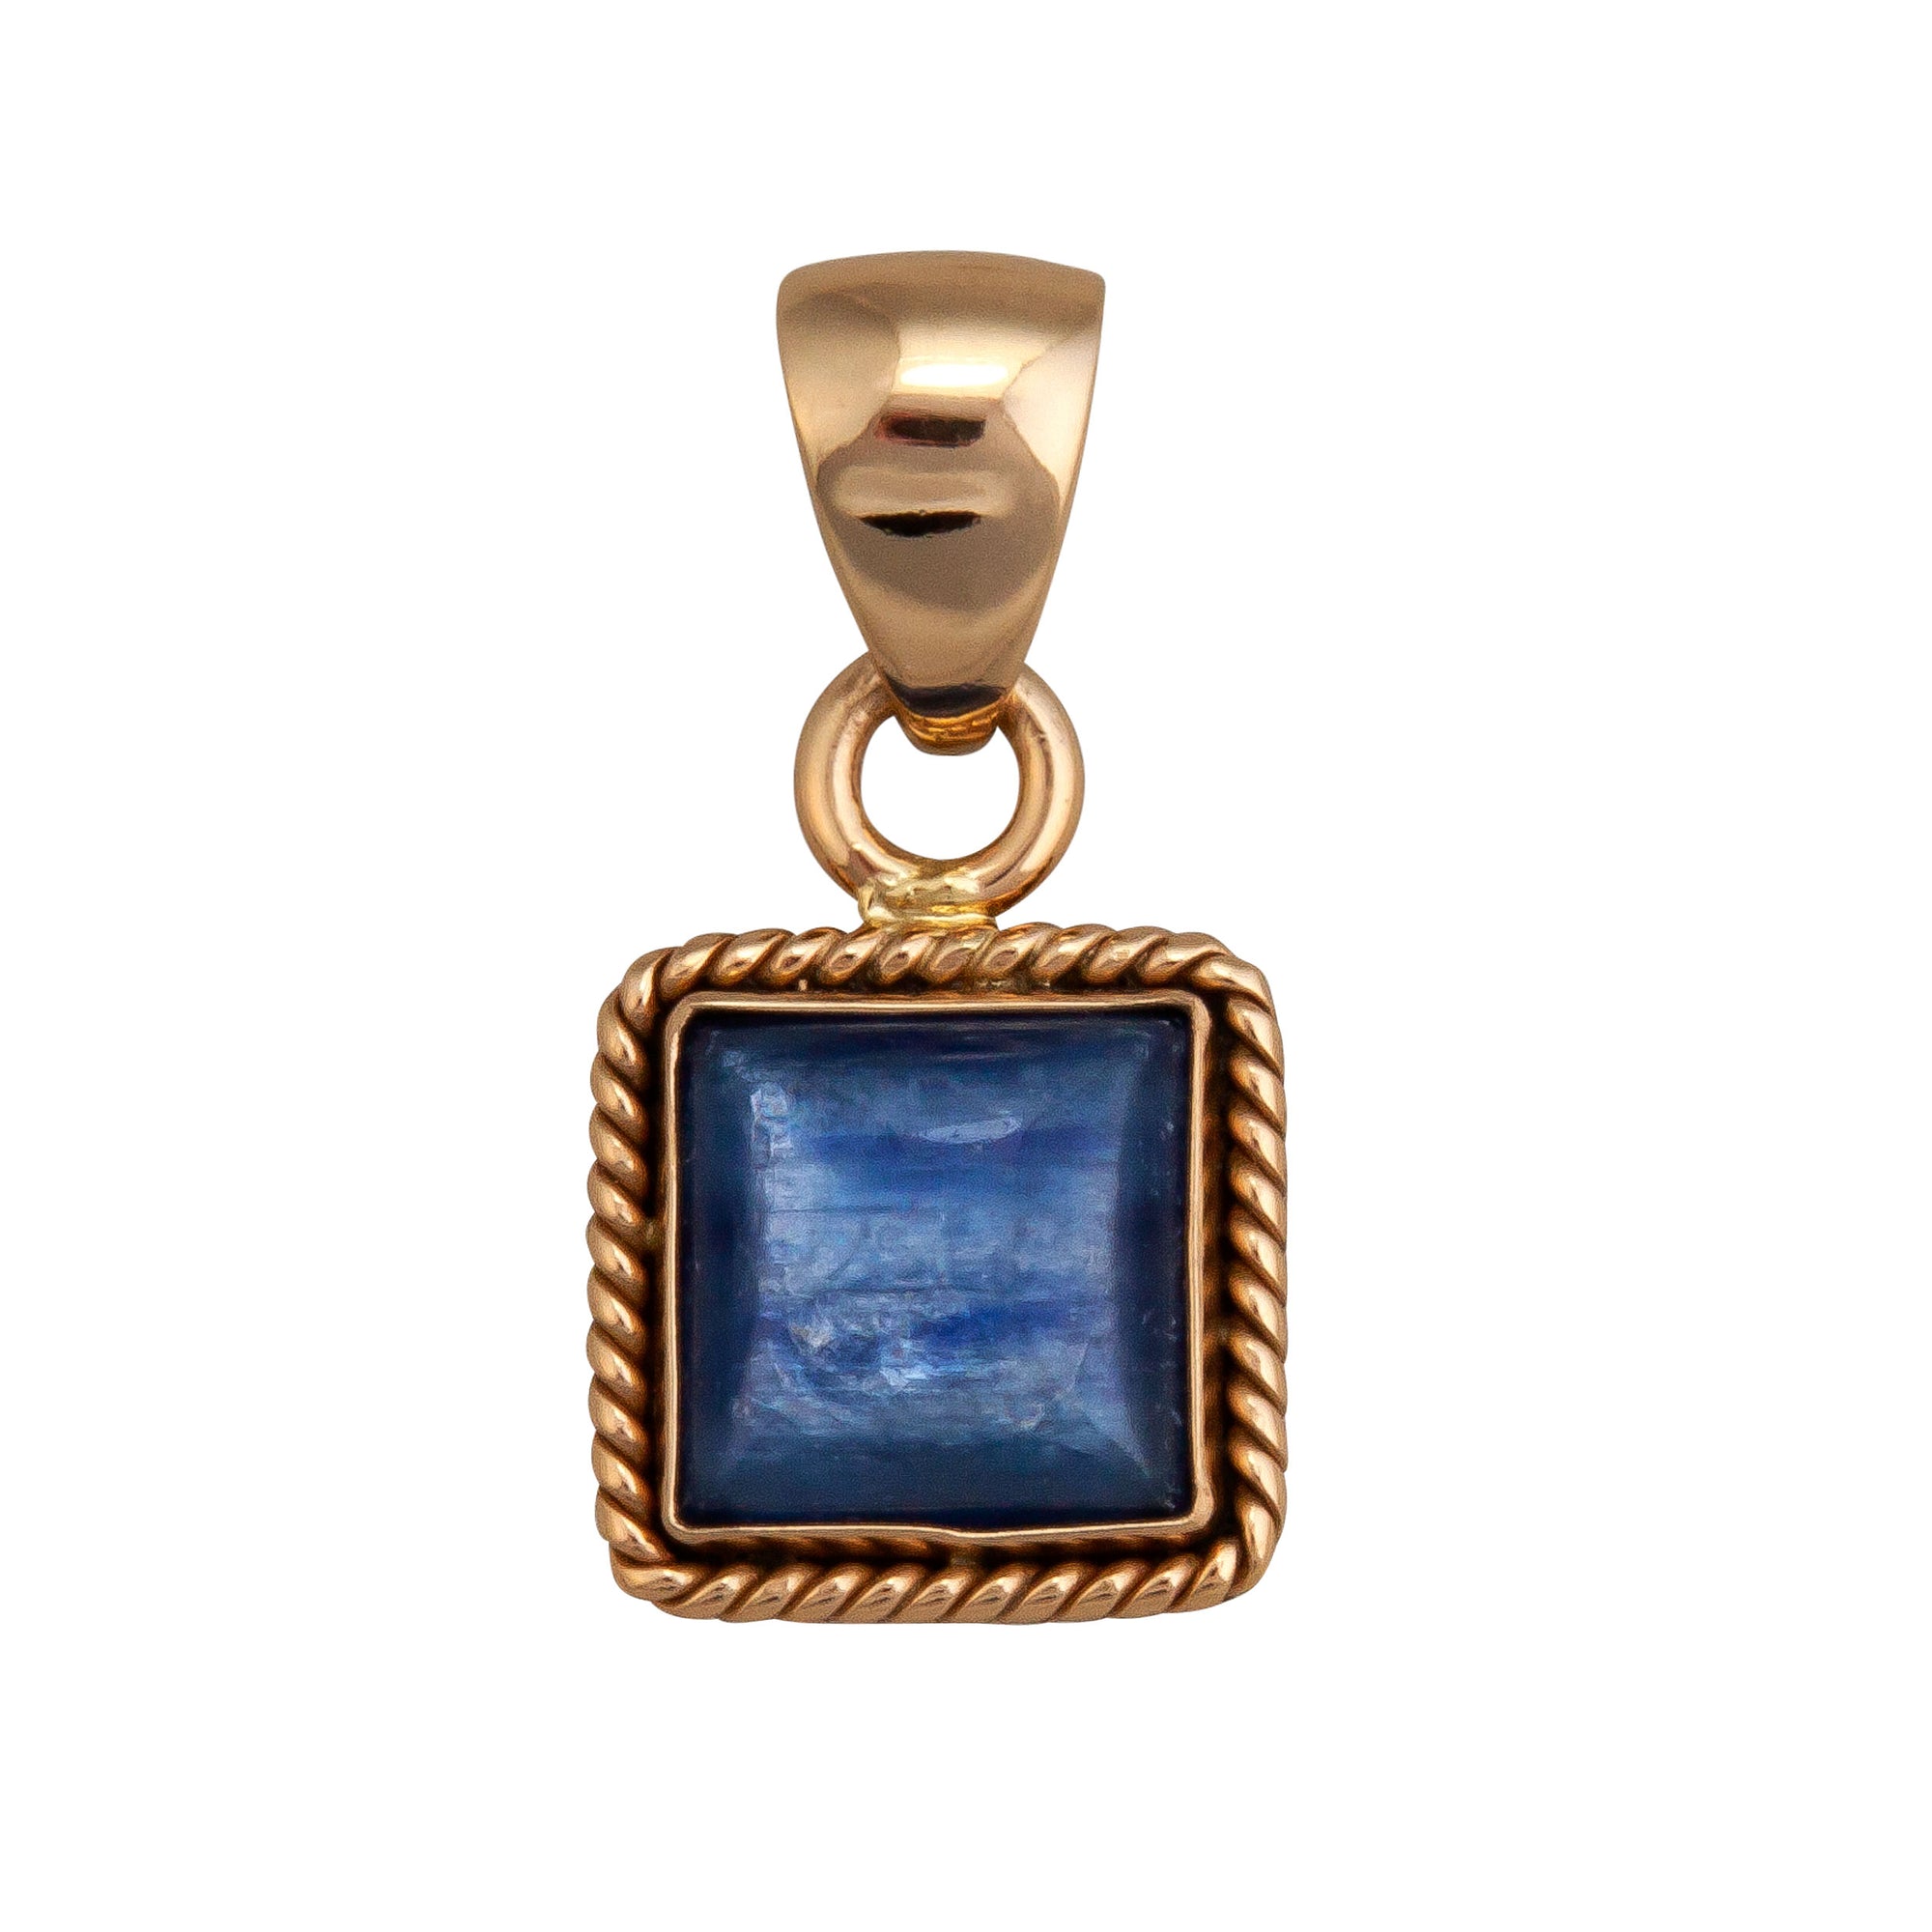 Charles Albert Jewelry - Alchemia Kyanite Square Pendant with Rope Edge - Front View